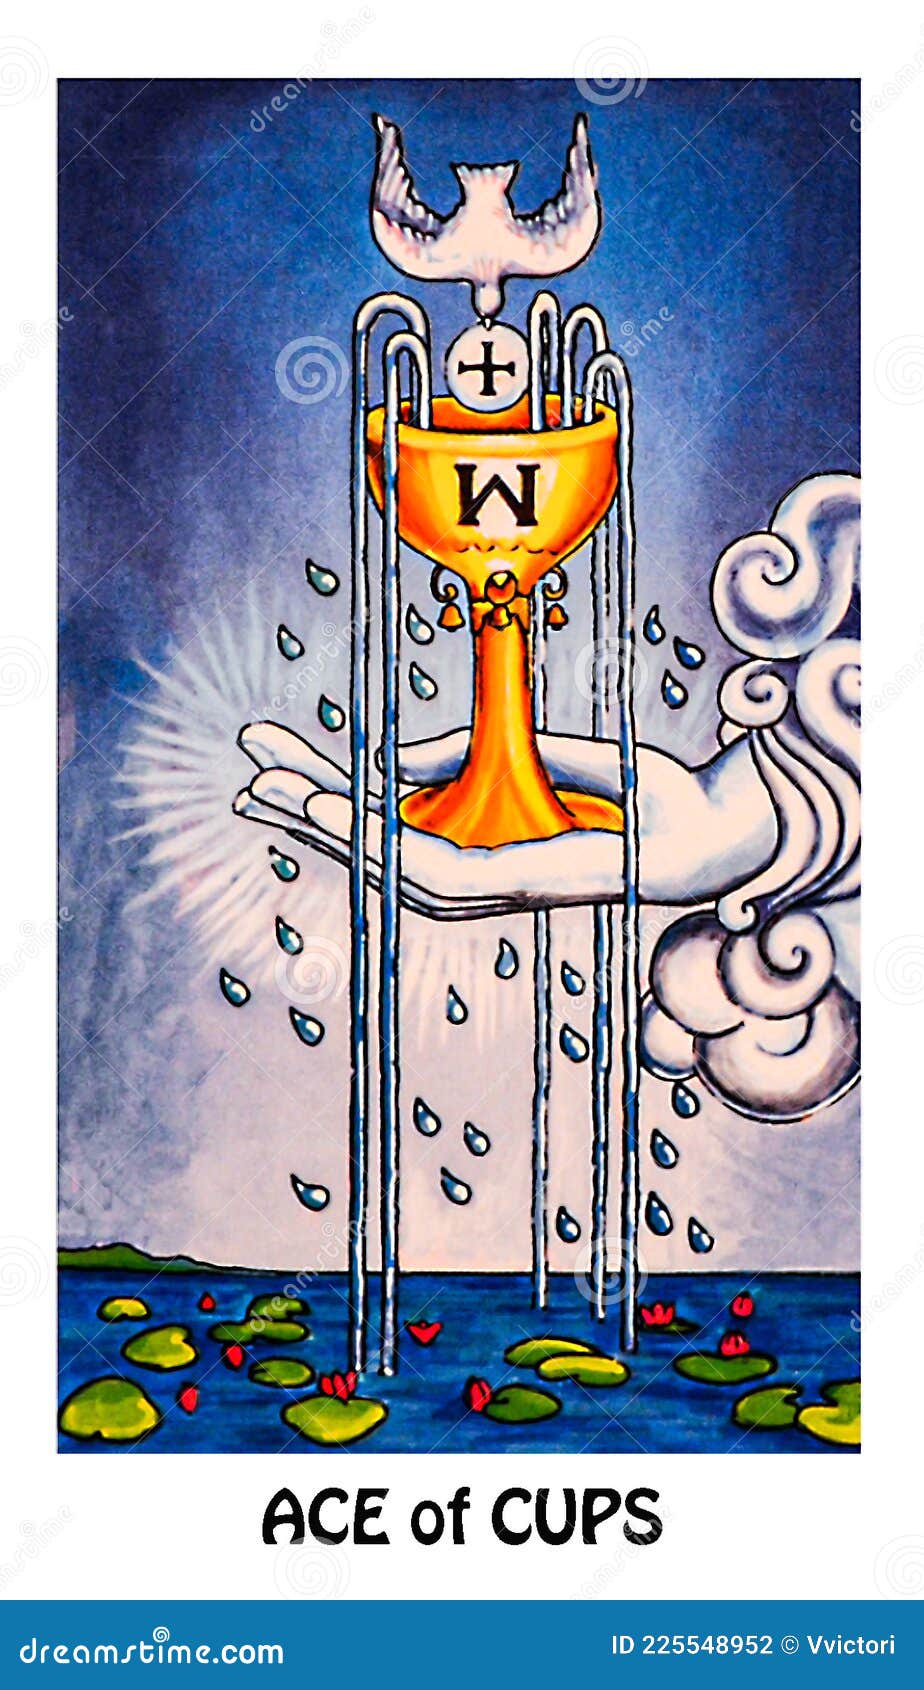 ace of cups tarot card new love joy happiness happy news contentment beginnings of love conception big hearted sharing